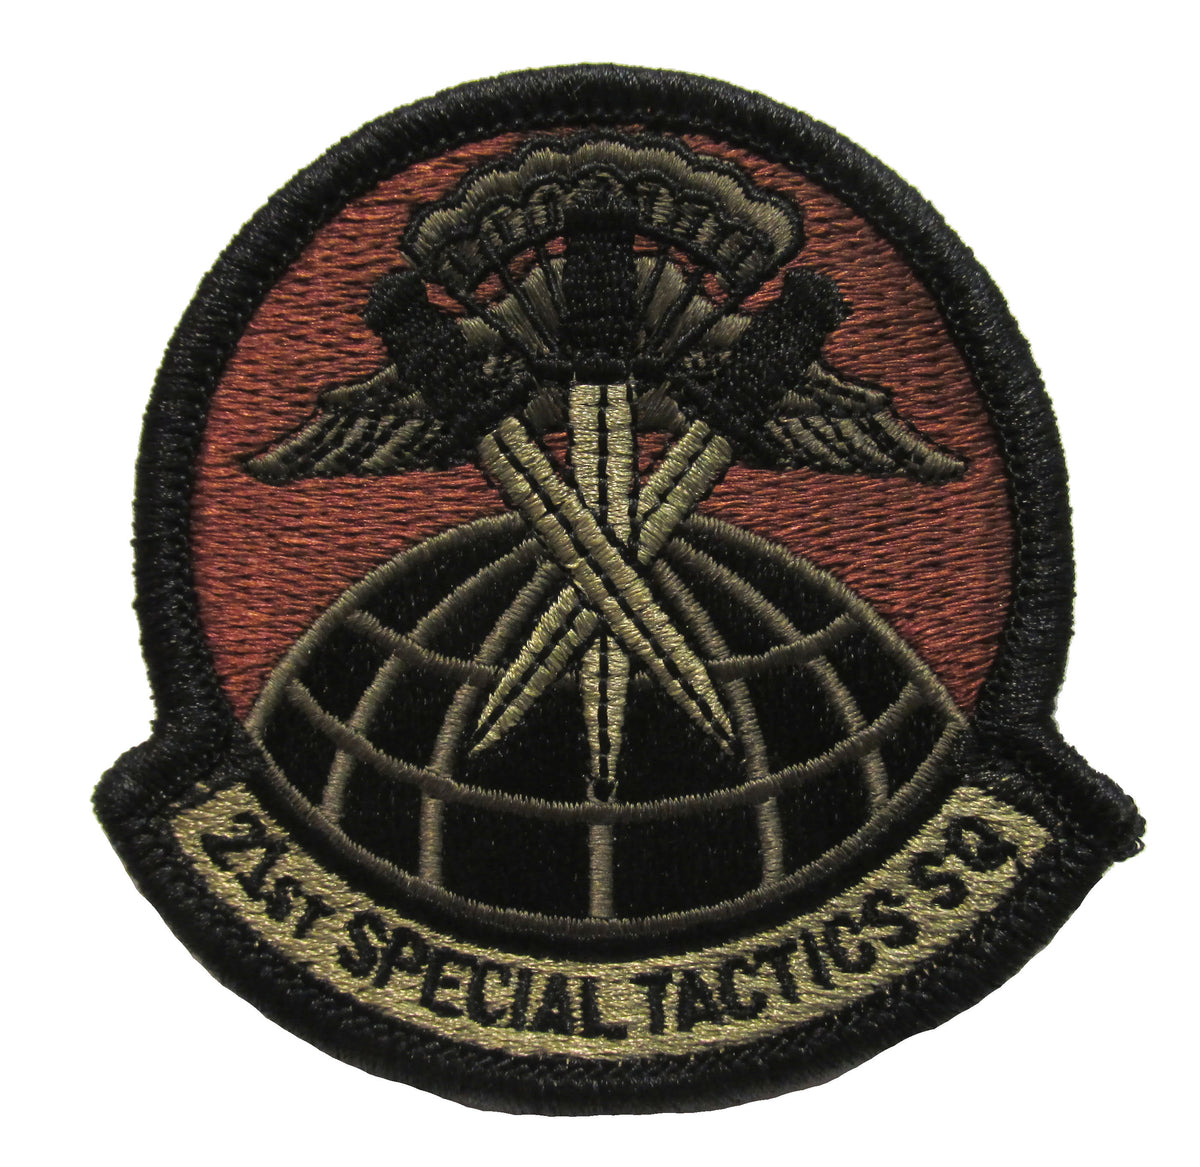 Multicam OCP MEDIC Patch with Hook Backing (Spice Brown Letters)